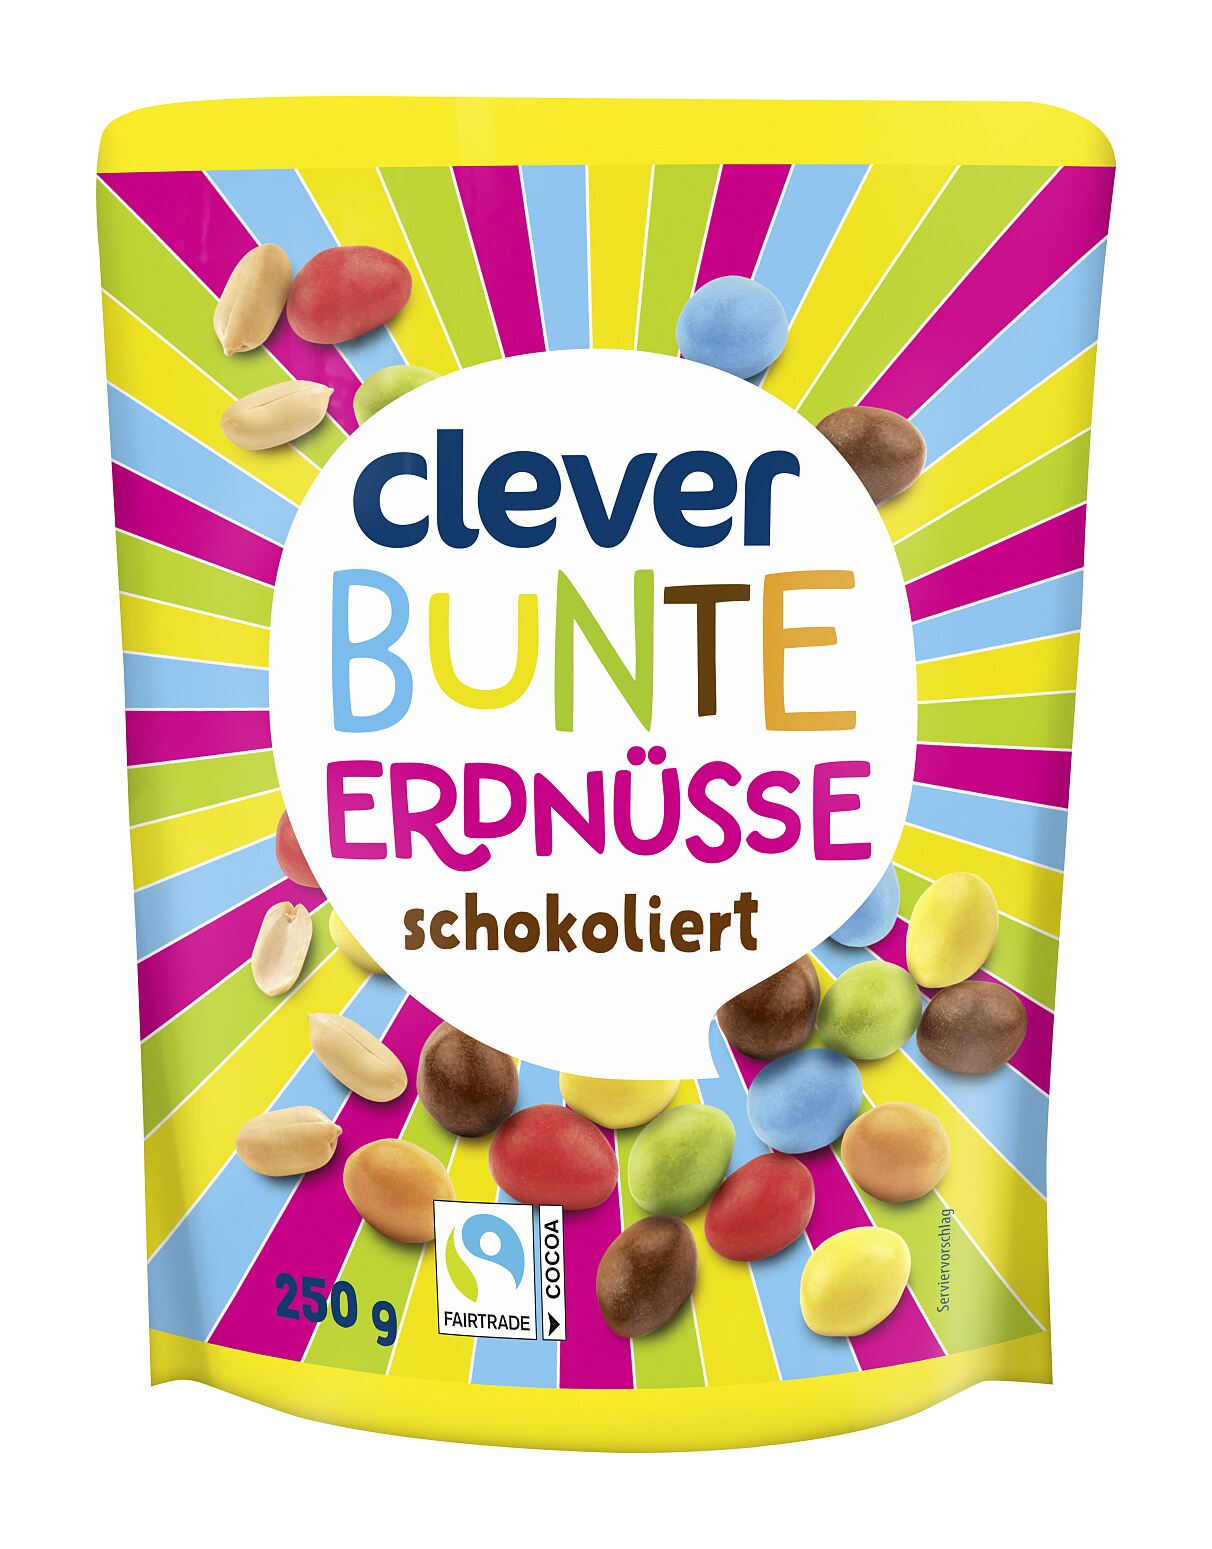 03_25 Jahre Clever